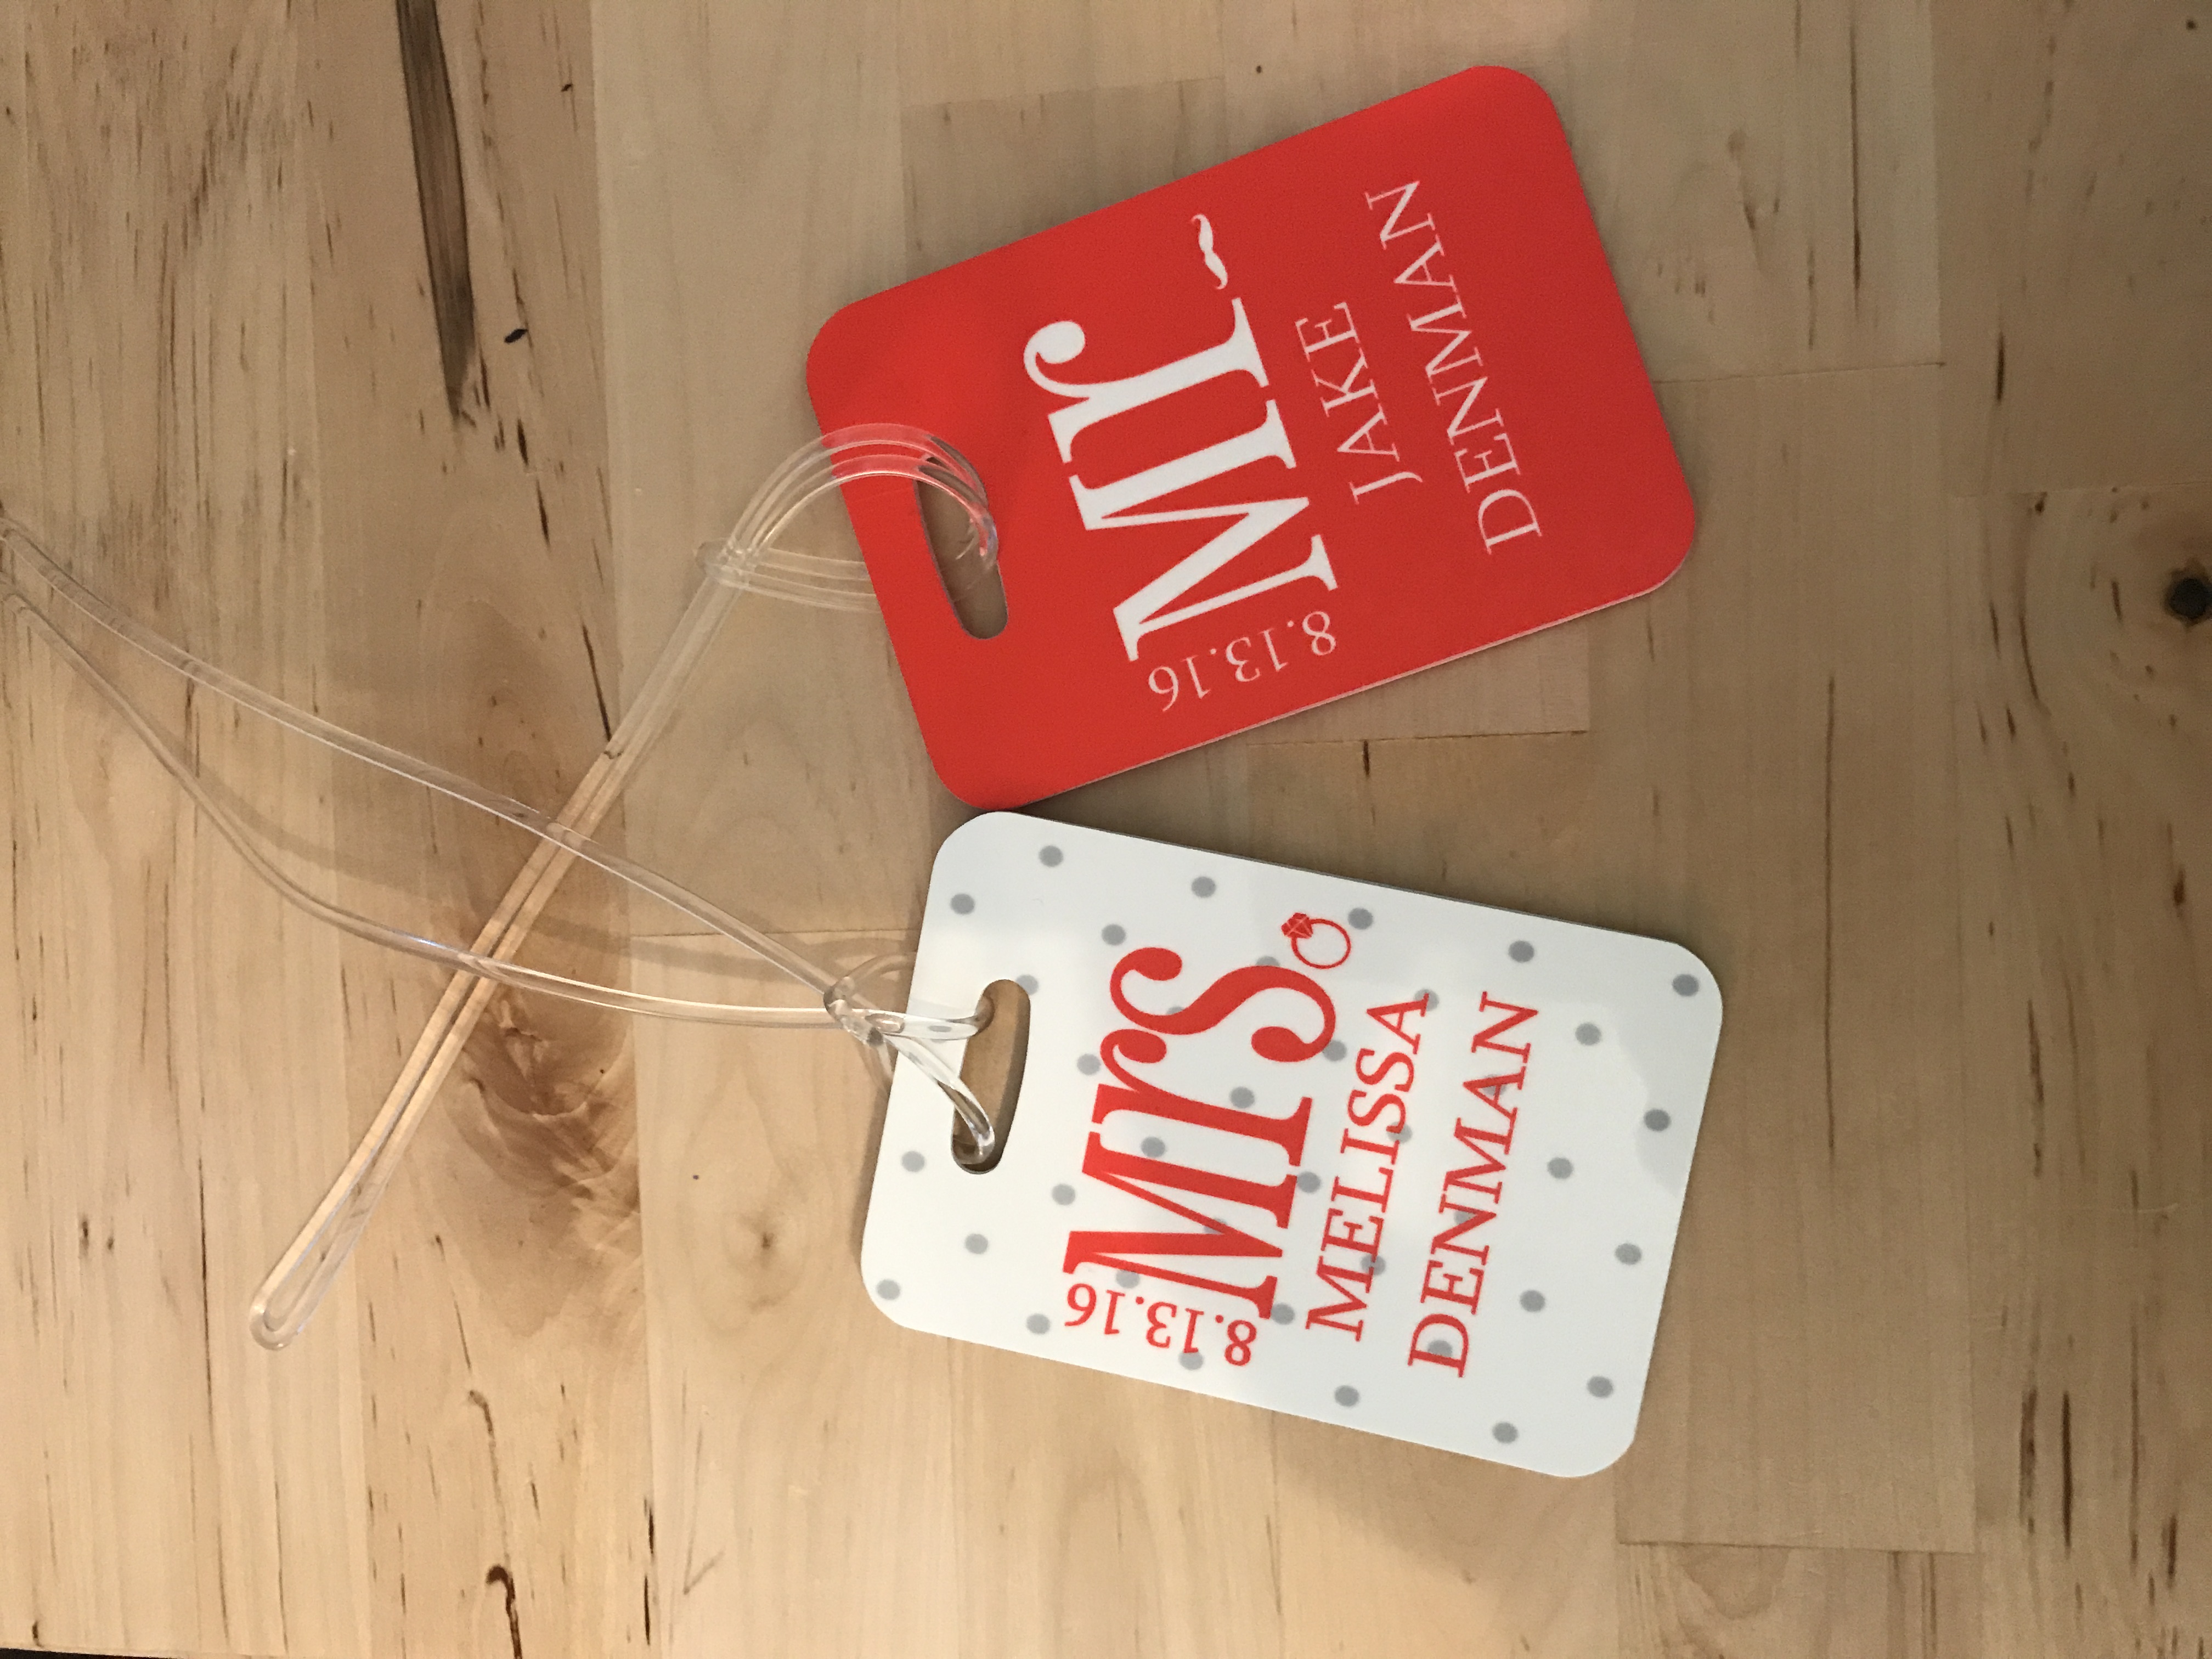 Mr. & Mrs. Luggage Tags made with sublimation printing